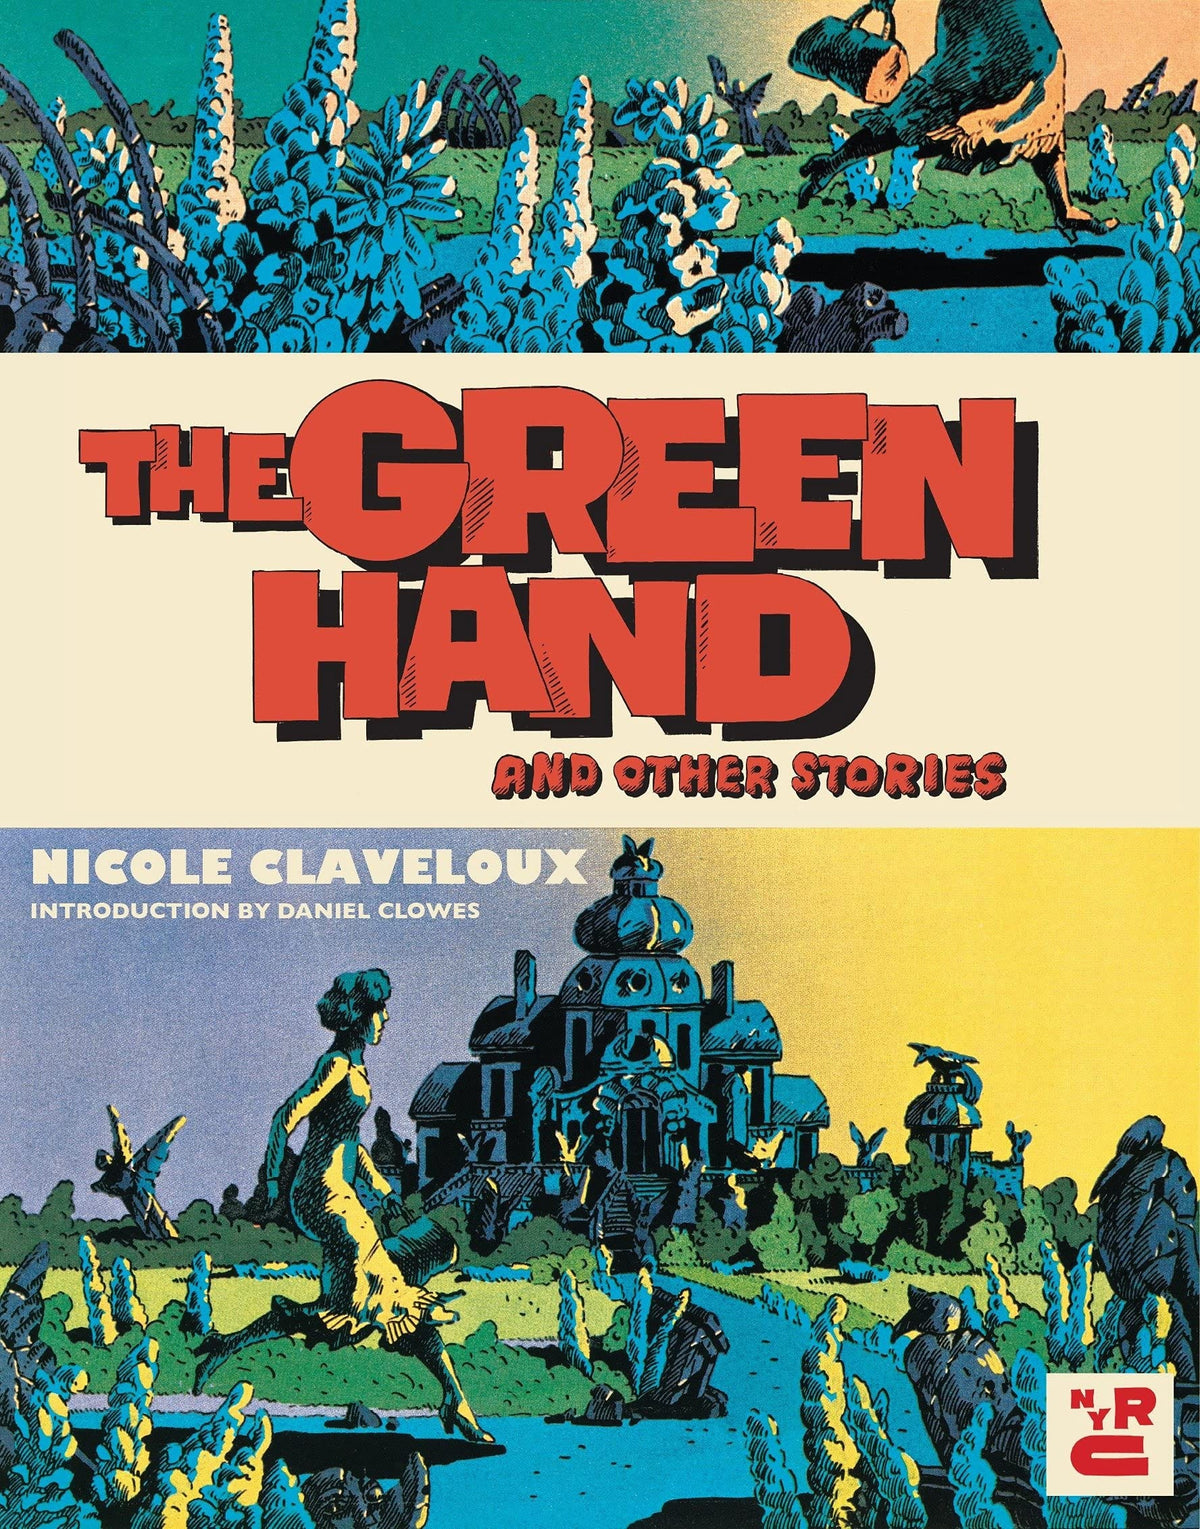 The Green Hand and Other Stories - Third Eye